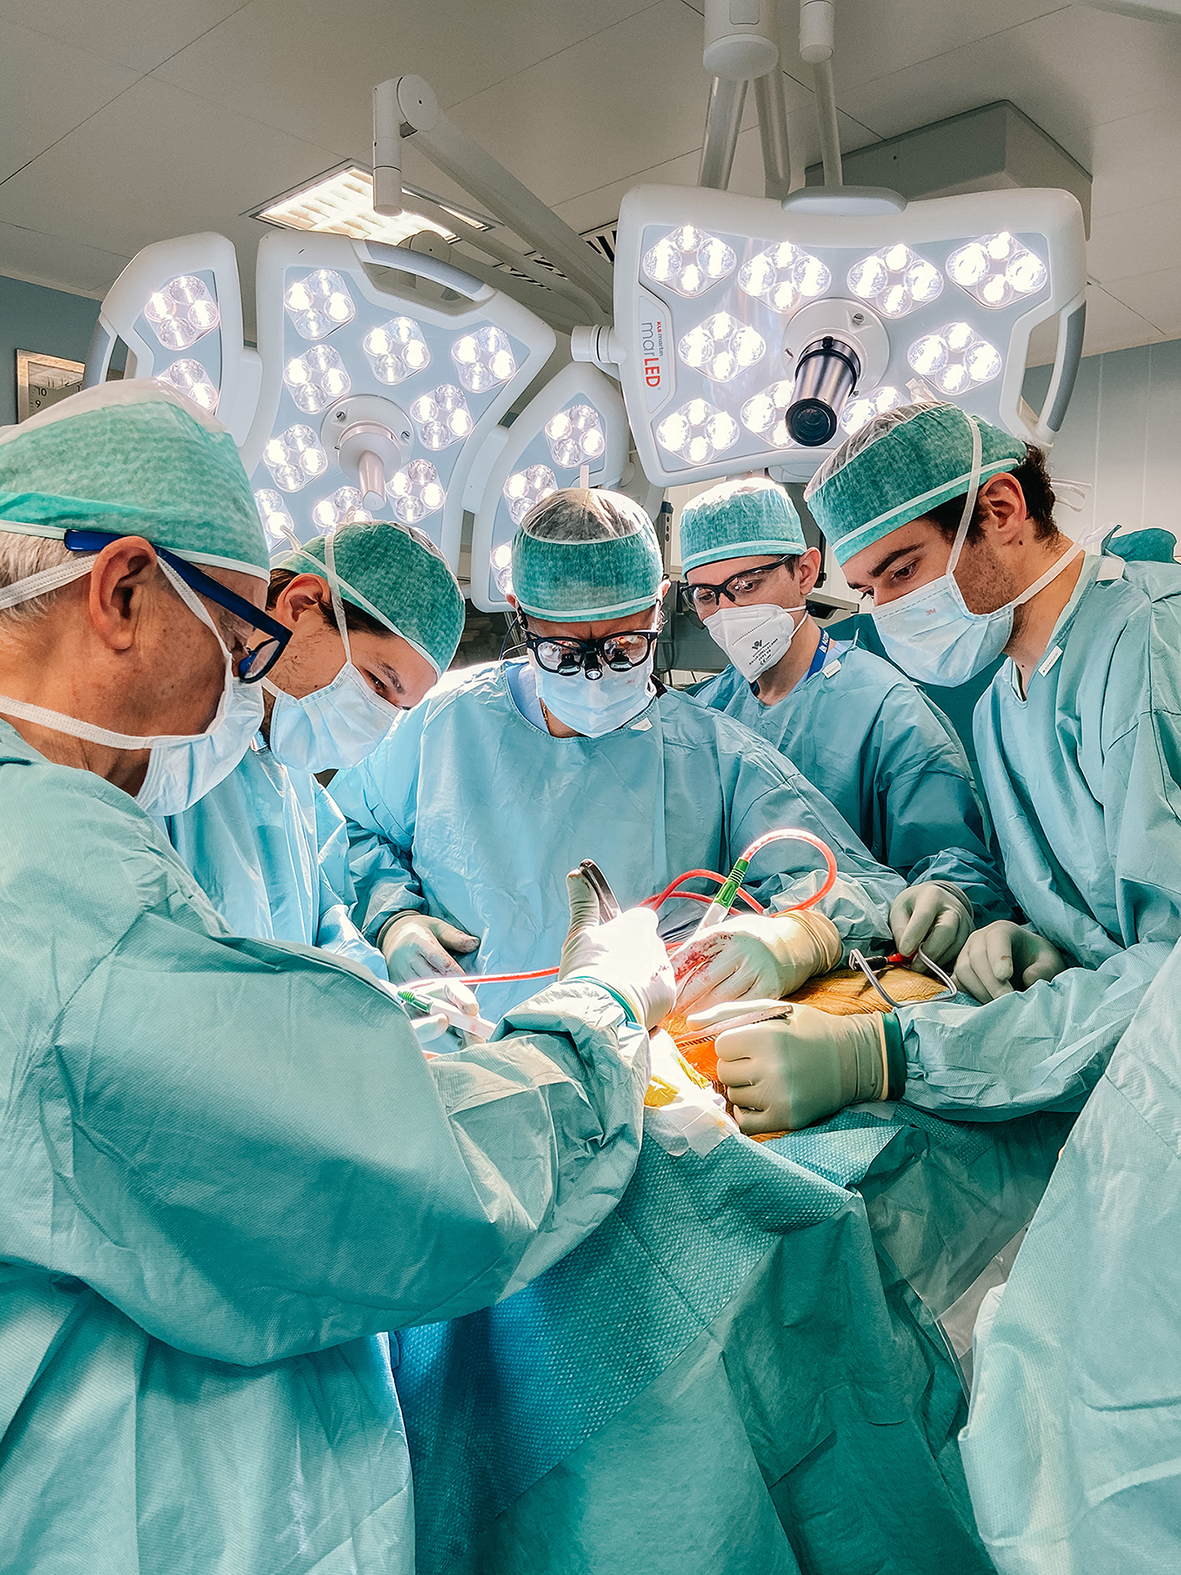 The Vertebral Surgery team in the operating theatre